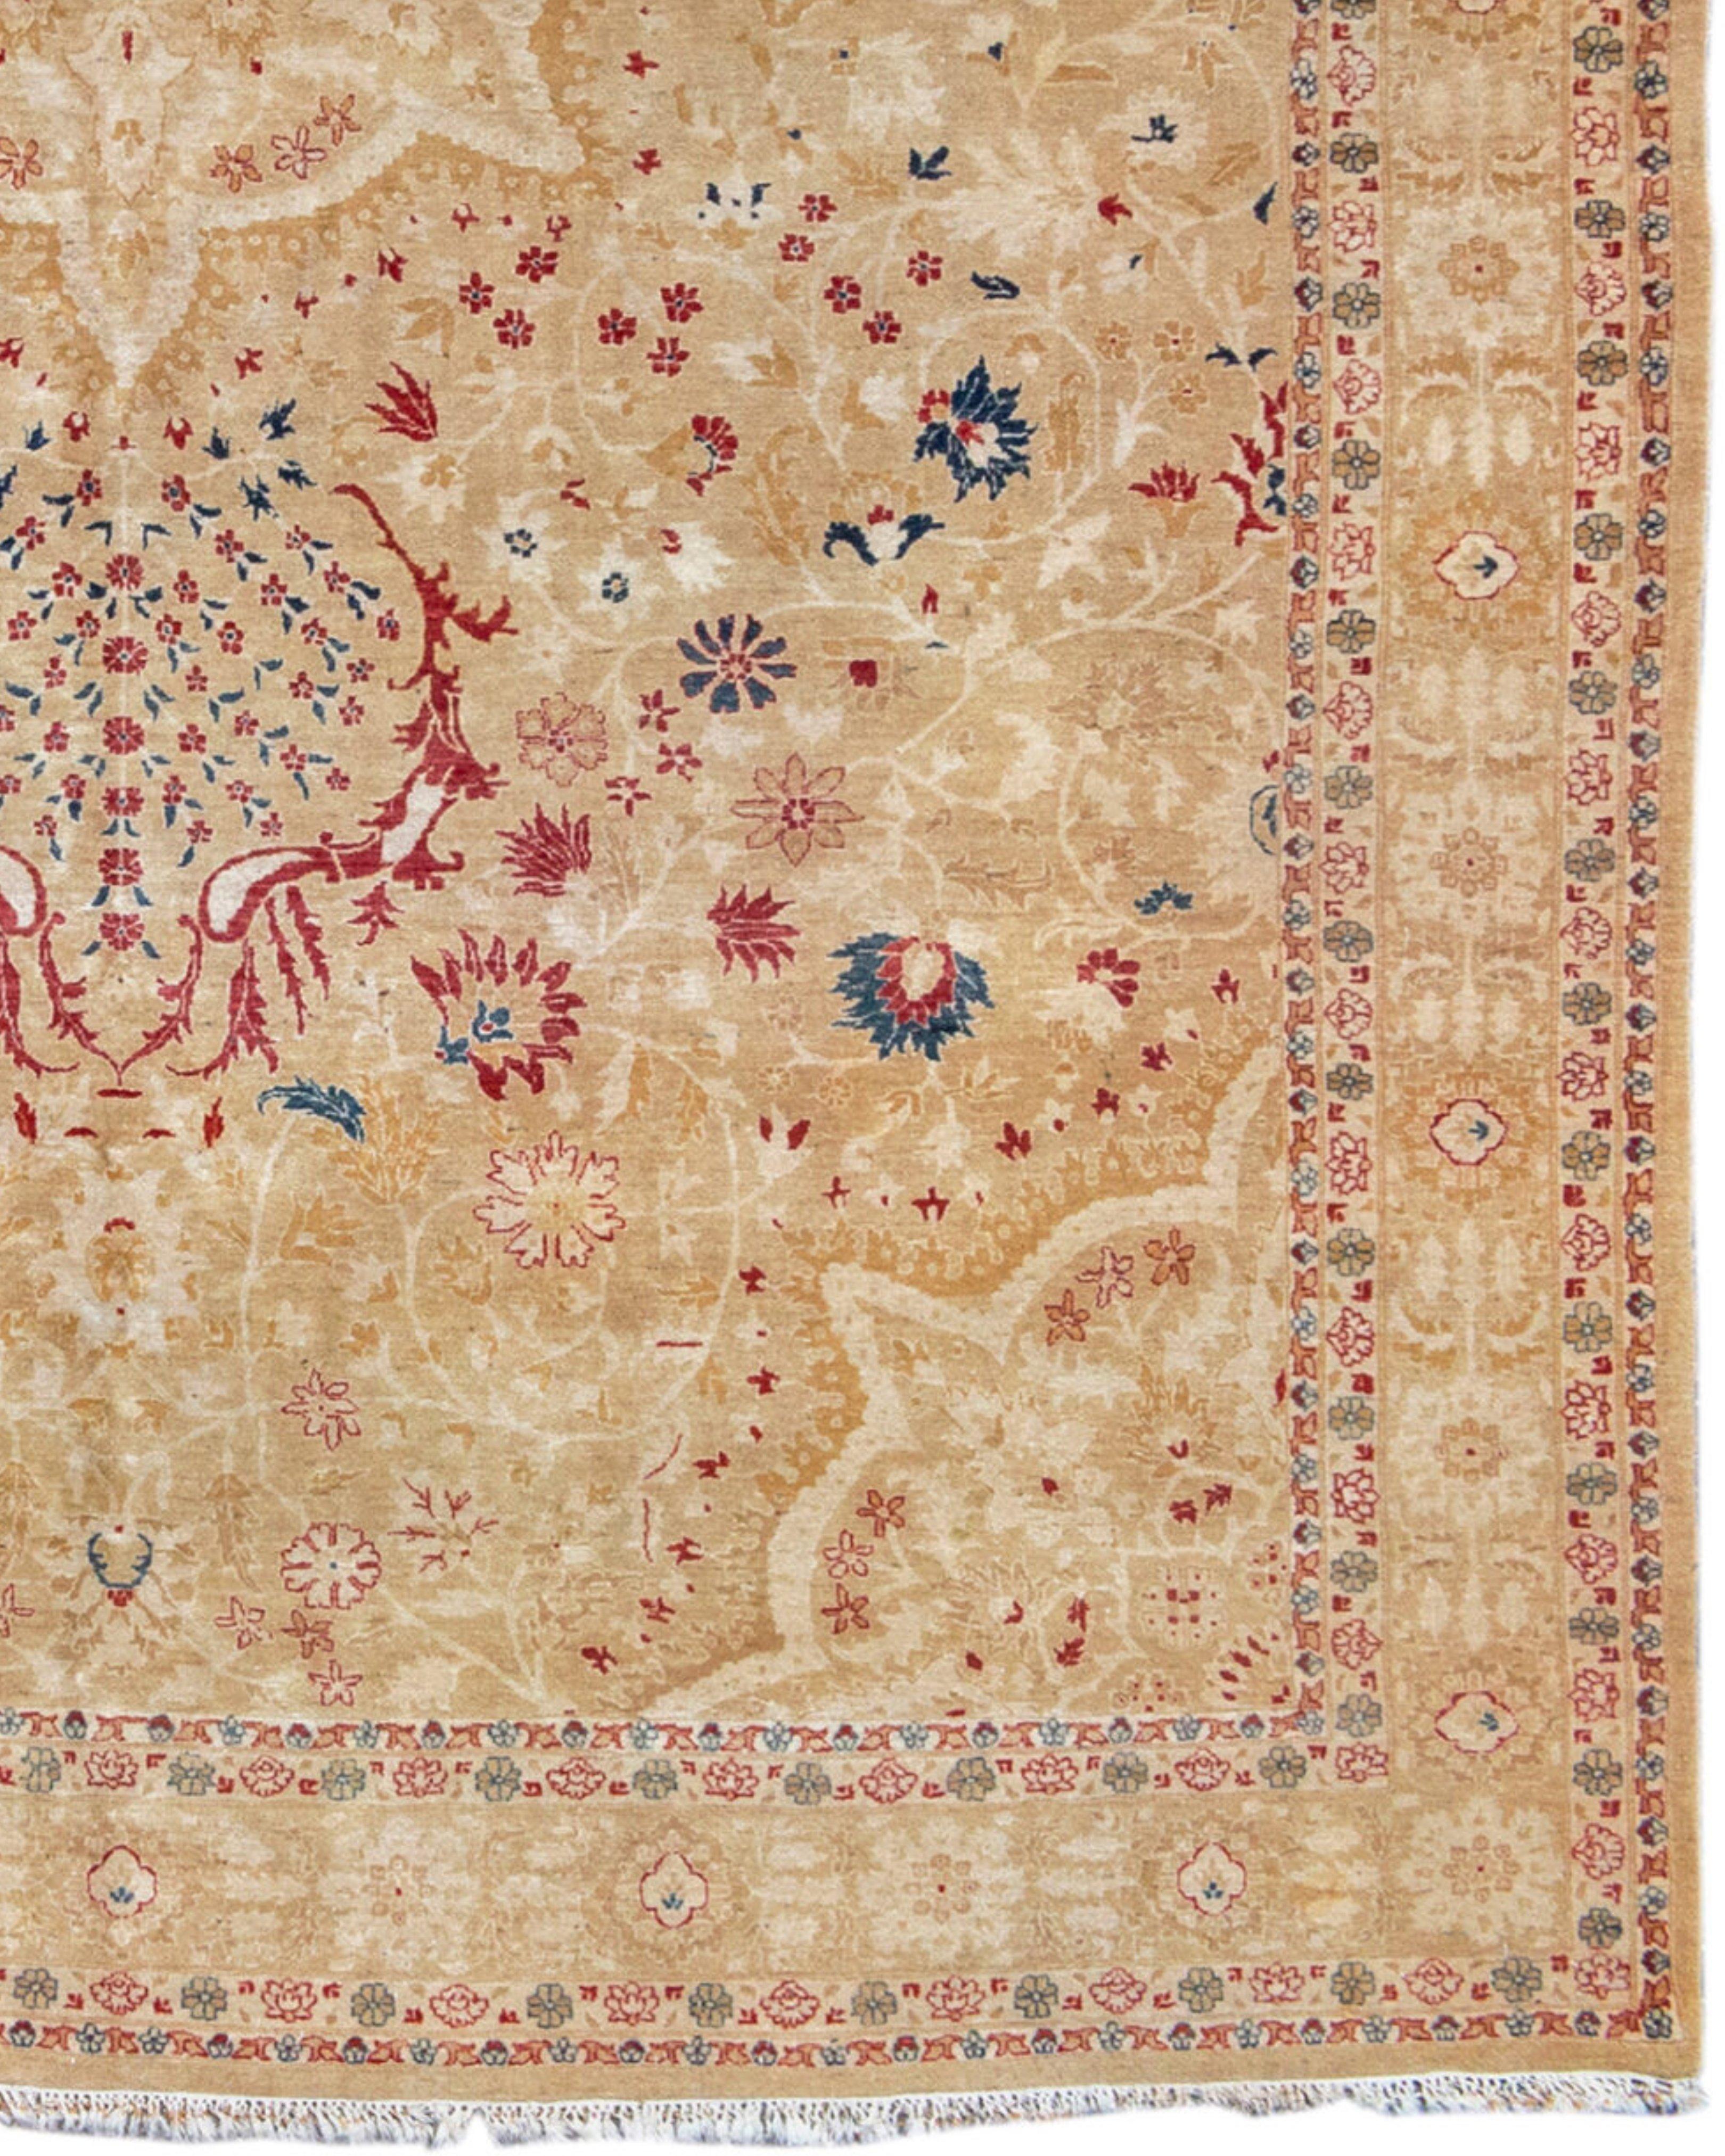 Indo Tabriz Carpet, Late 20th Century

Additional Information:
Dimensions: 9'0